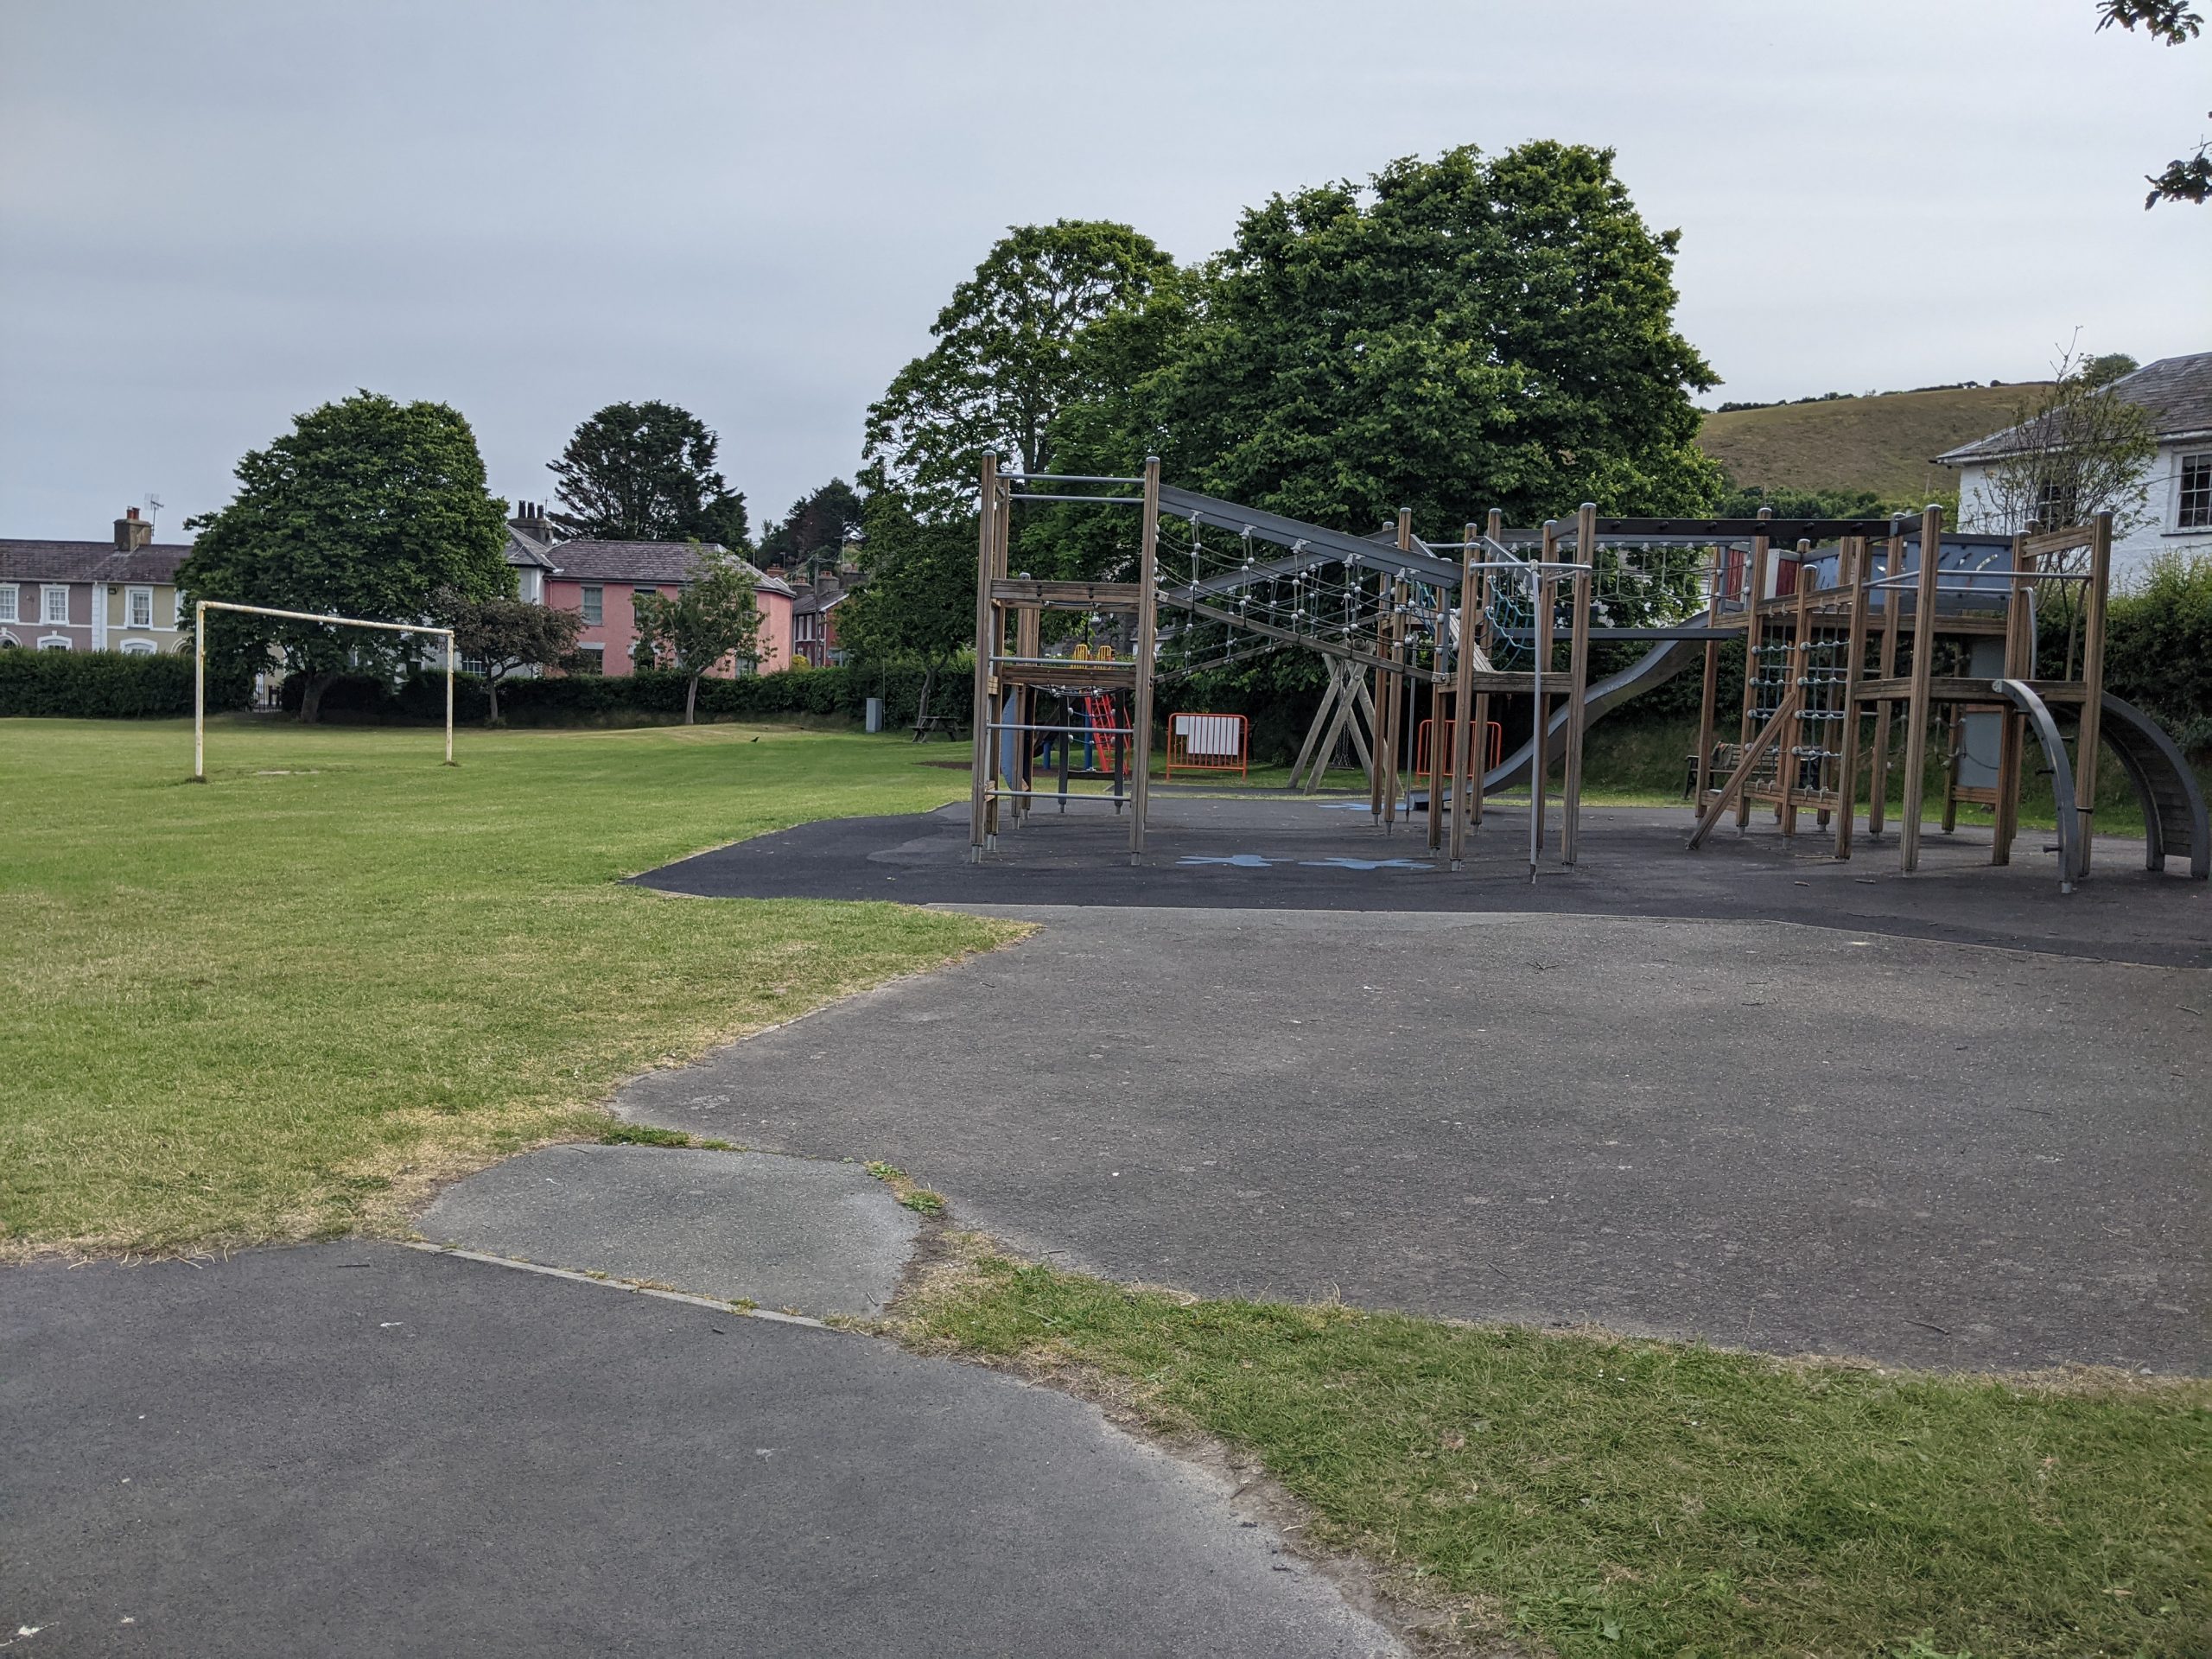 Grass area with housing in the background, football goalposts and a wooden and metal installed play area.